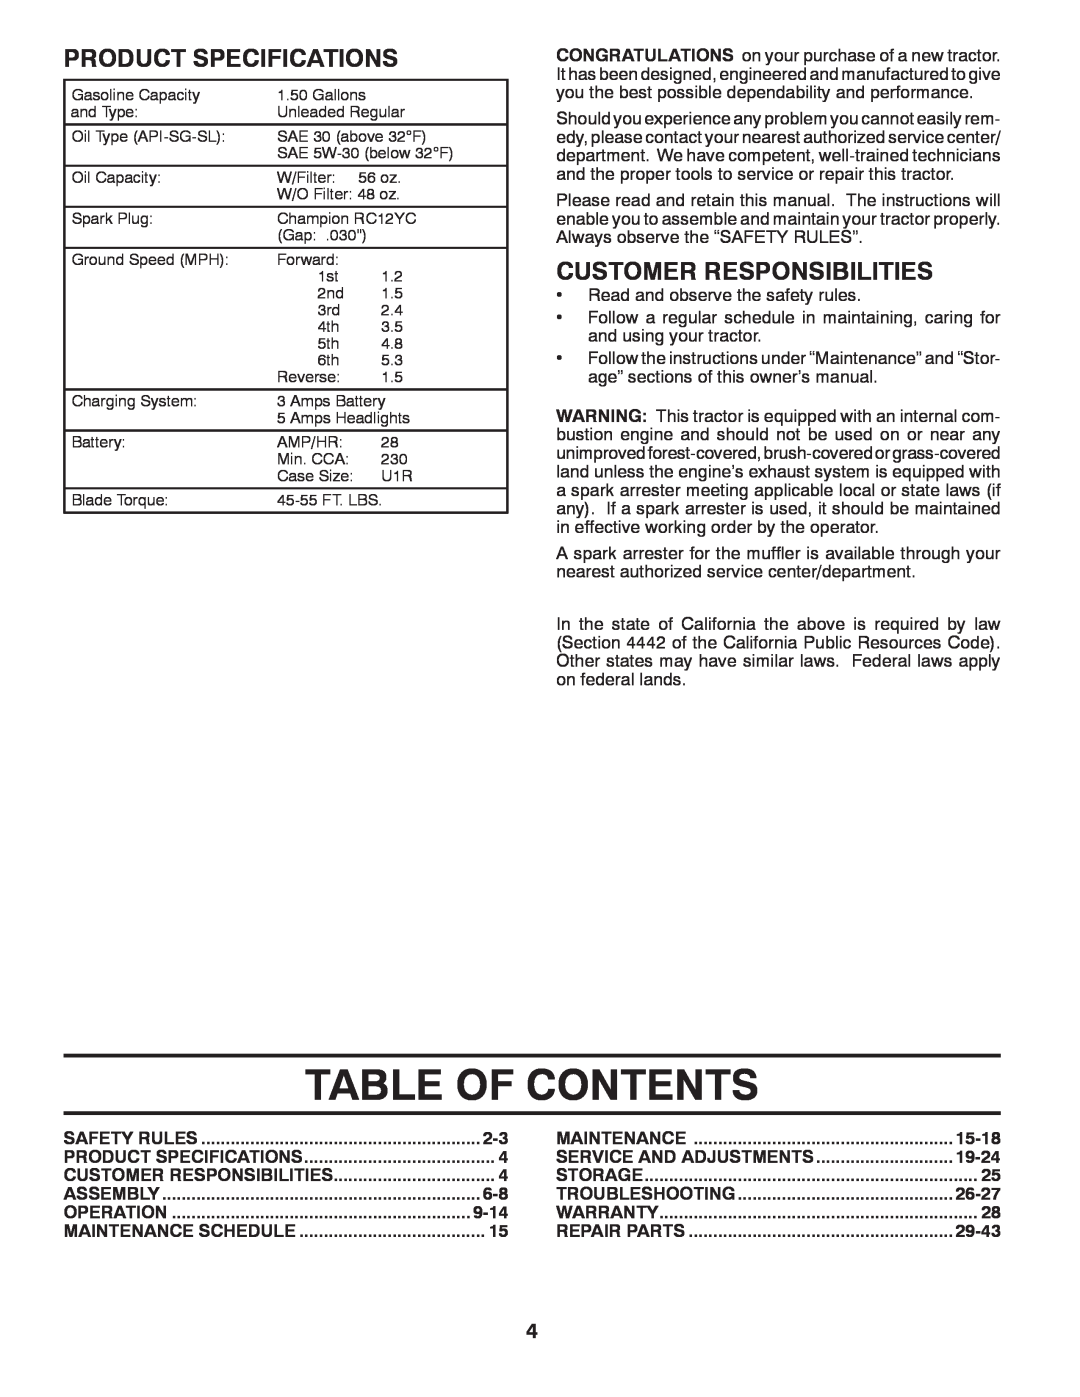 Poulan PB19542LT Table Of Contents, Product Specifications, Customer Responsibilities, 9-14, 15-18, 19-24, 26-27, 29-43 